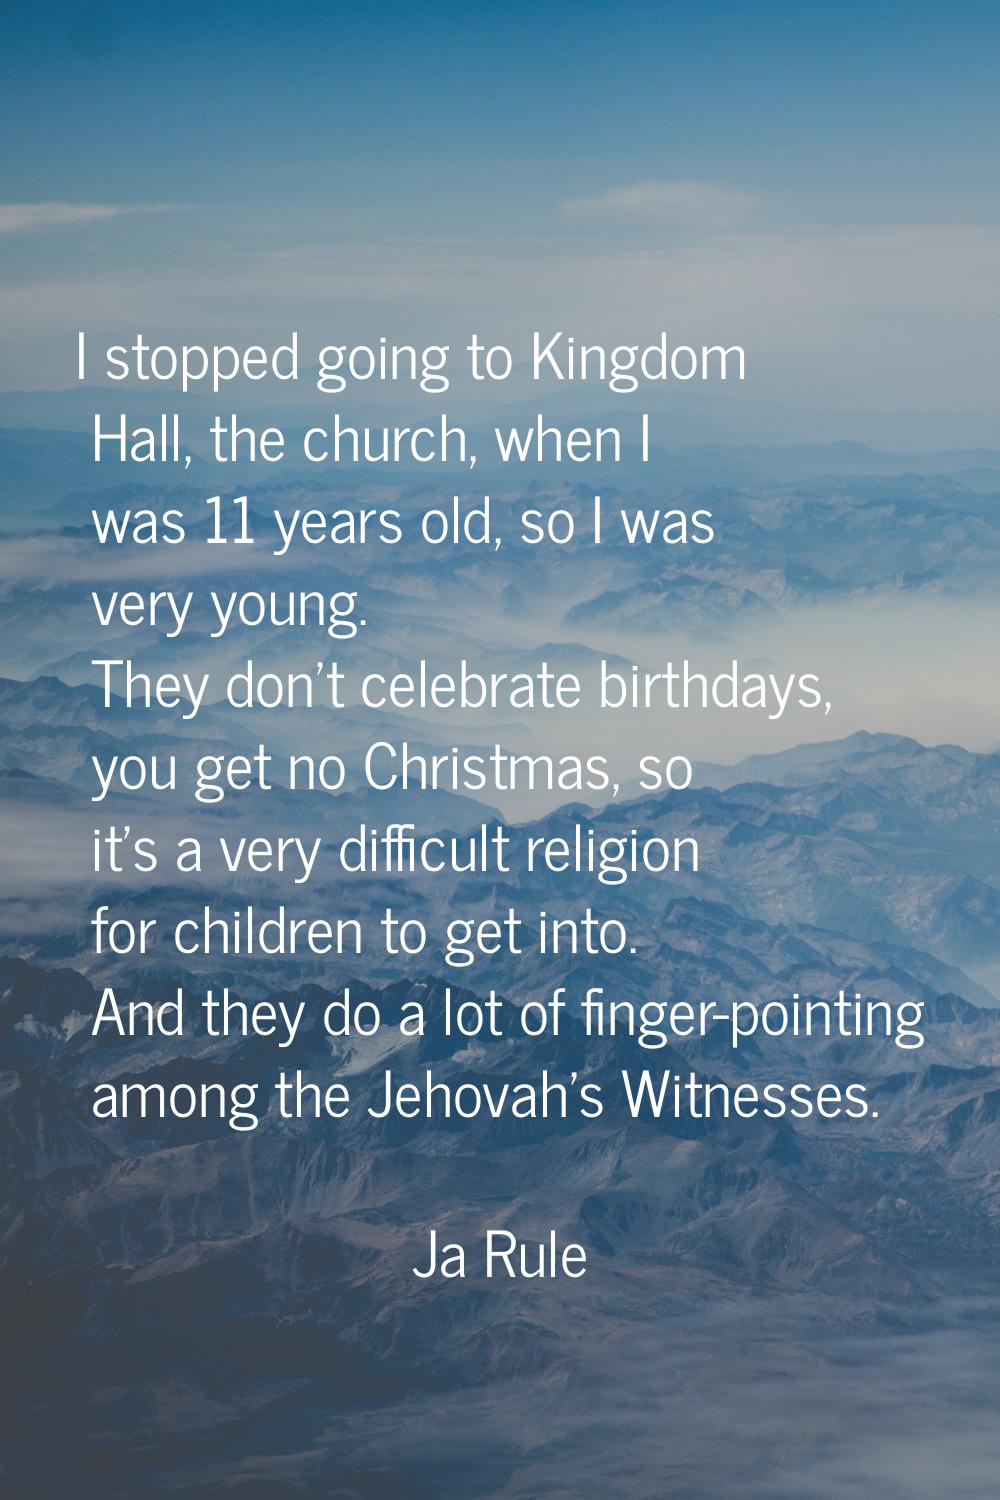 I stopped going to Kingdom Hall, the church, when I was 11 years old, so I was very young. They don